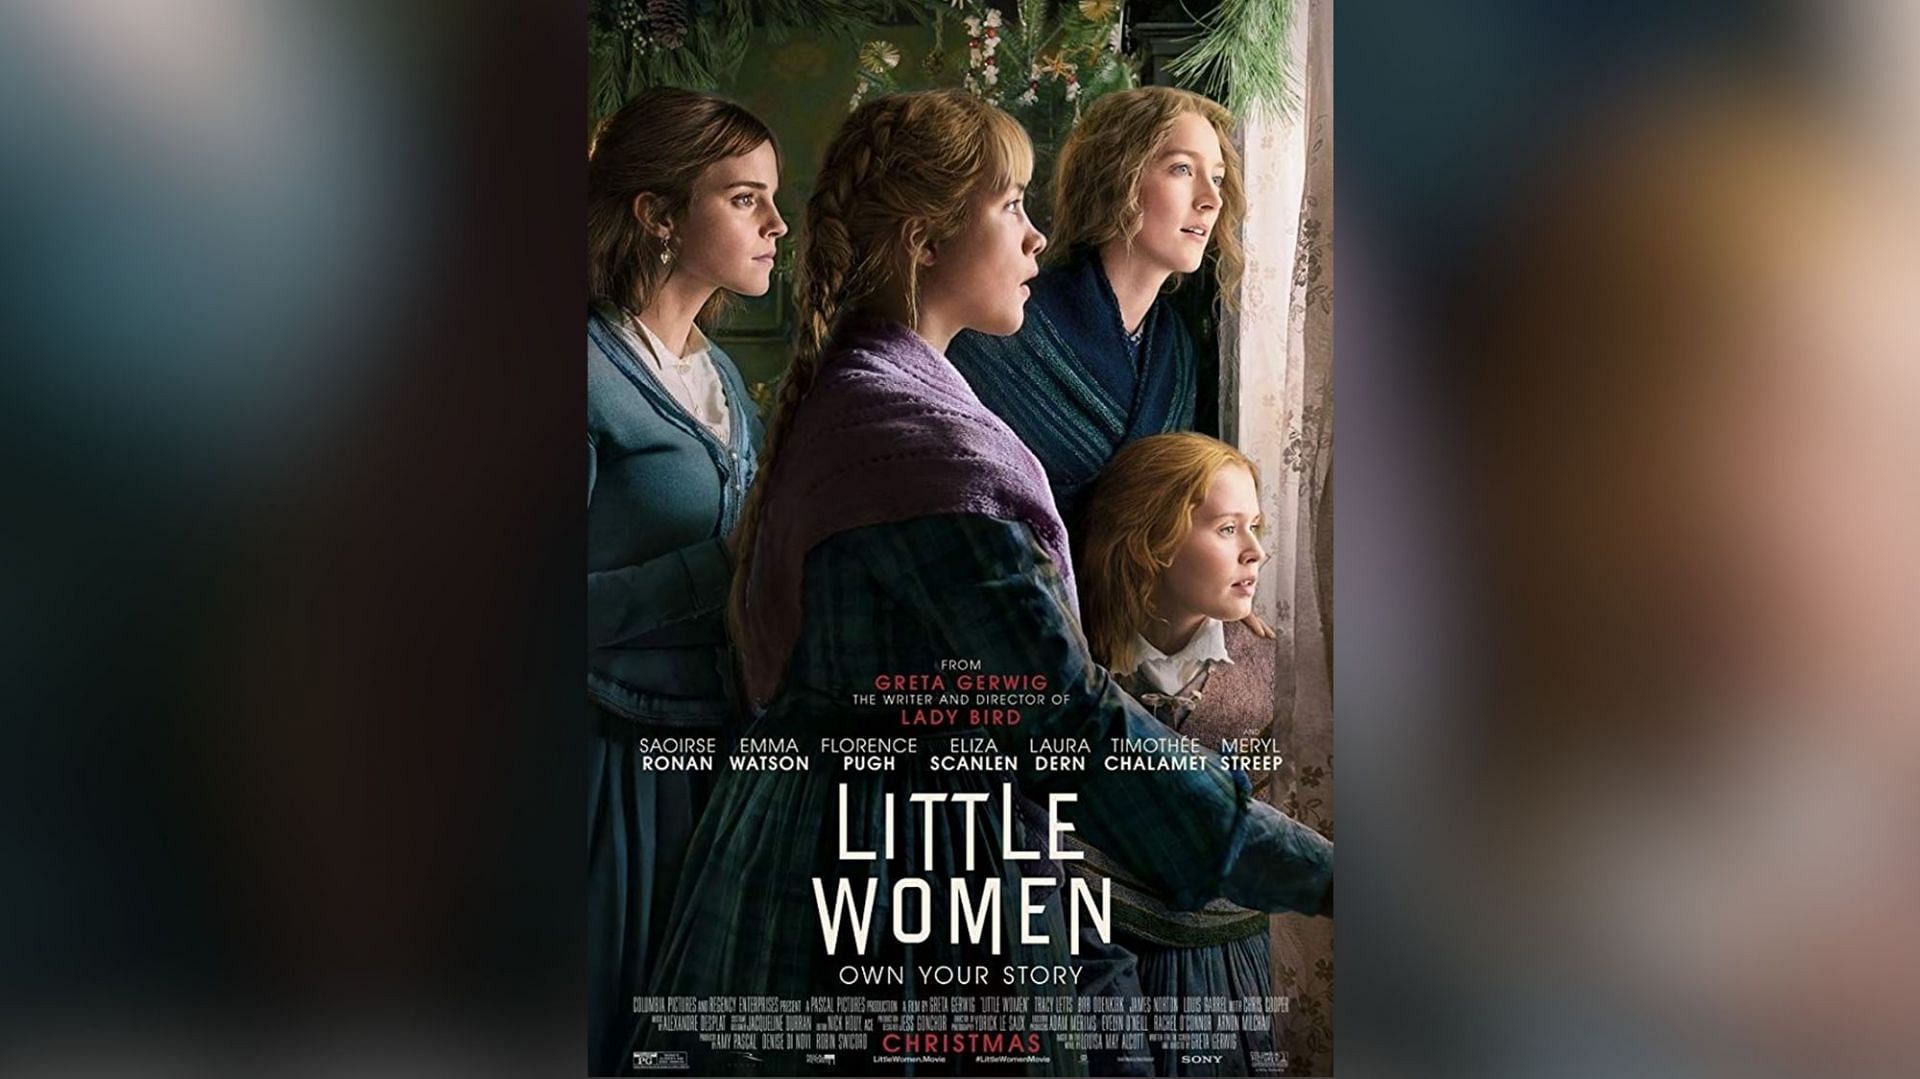 Little Women (Image via Sony Pictures)